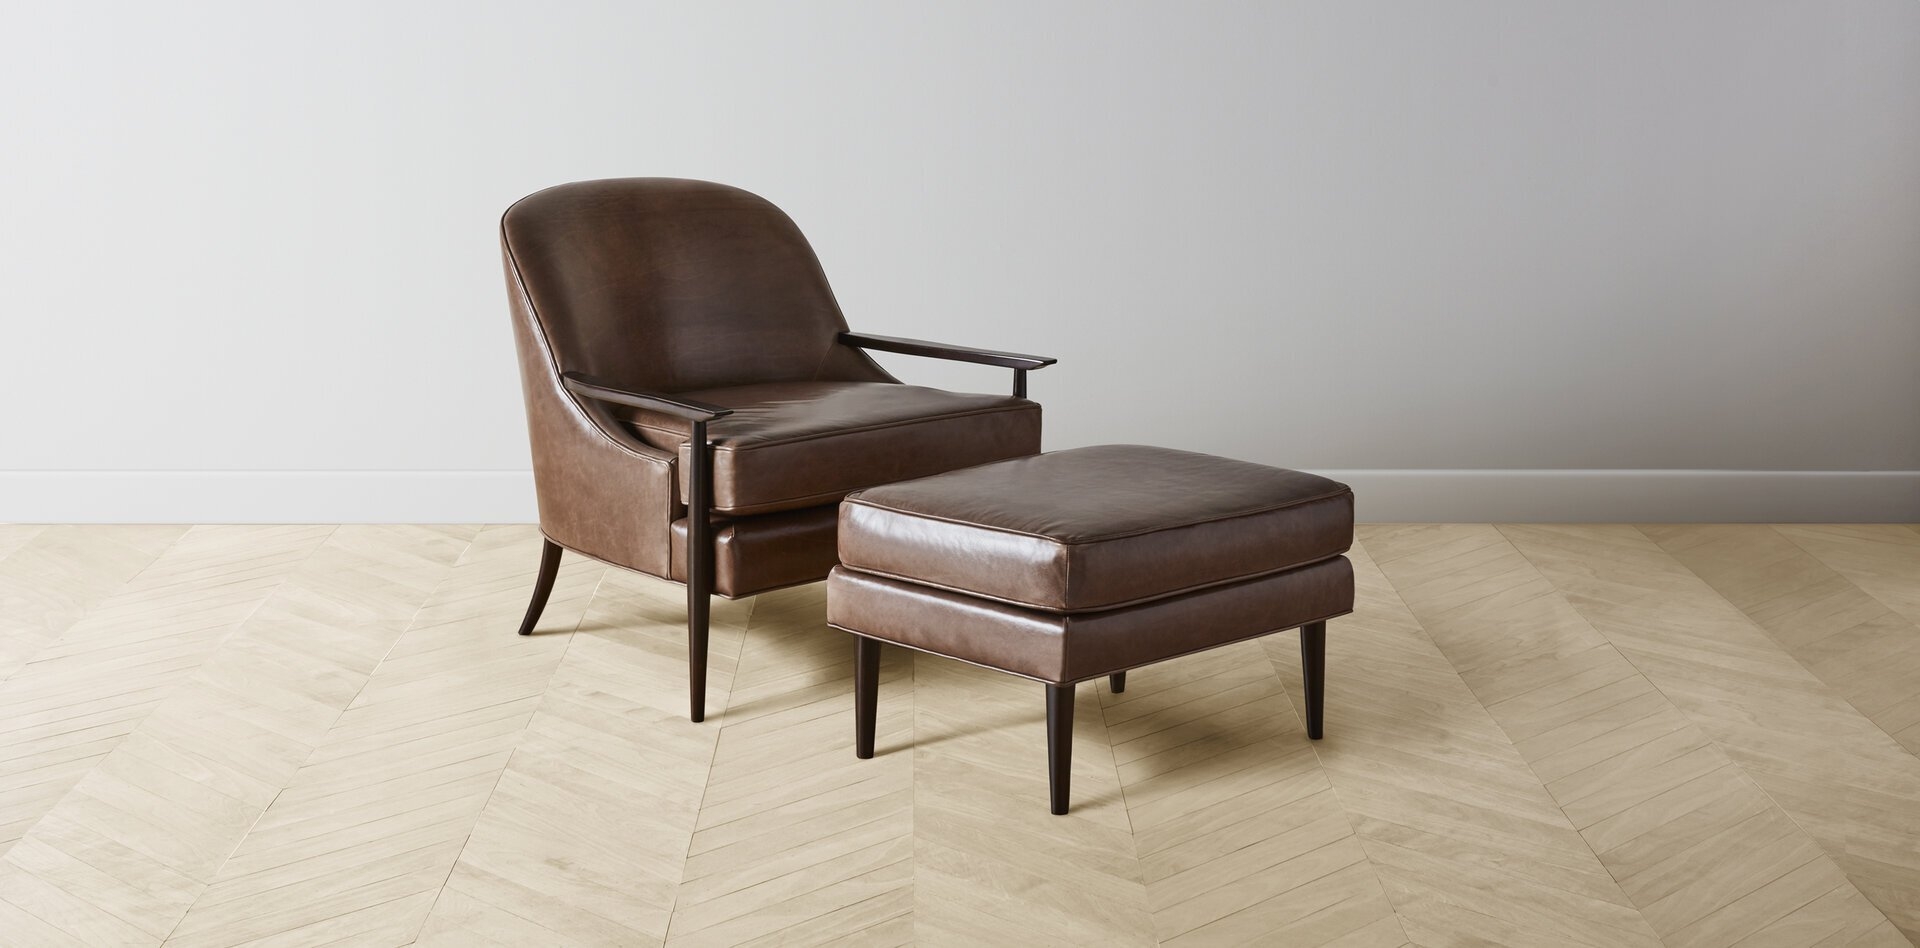 The Leroy - Chair - Image 4